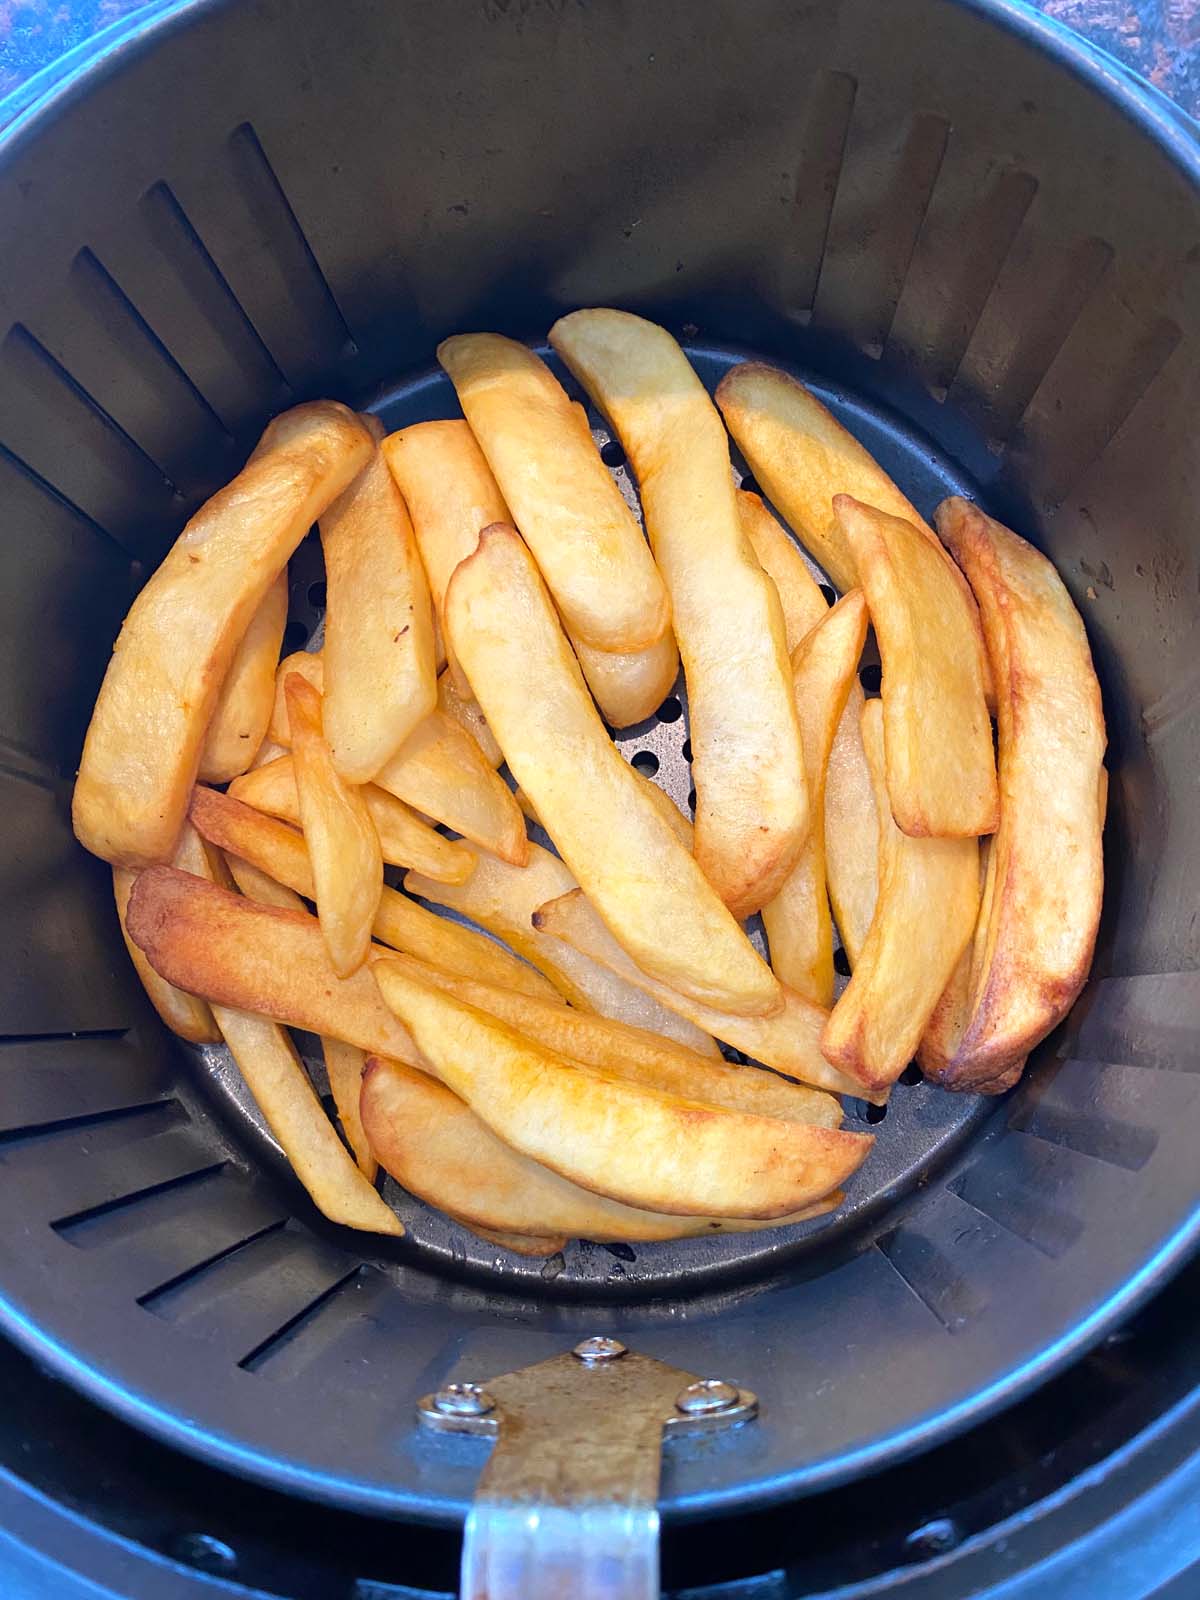 Cooked steak fries in an air fryer. 